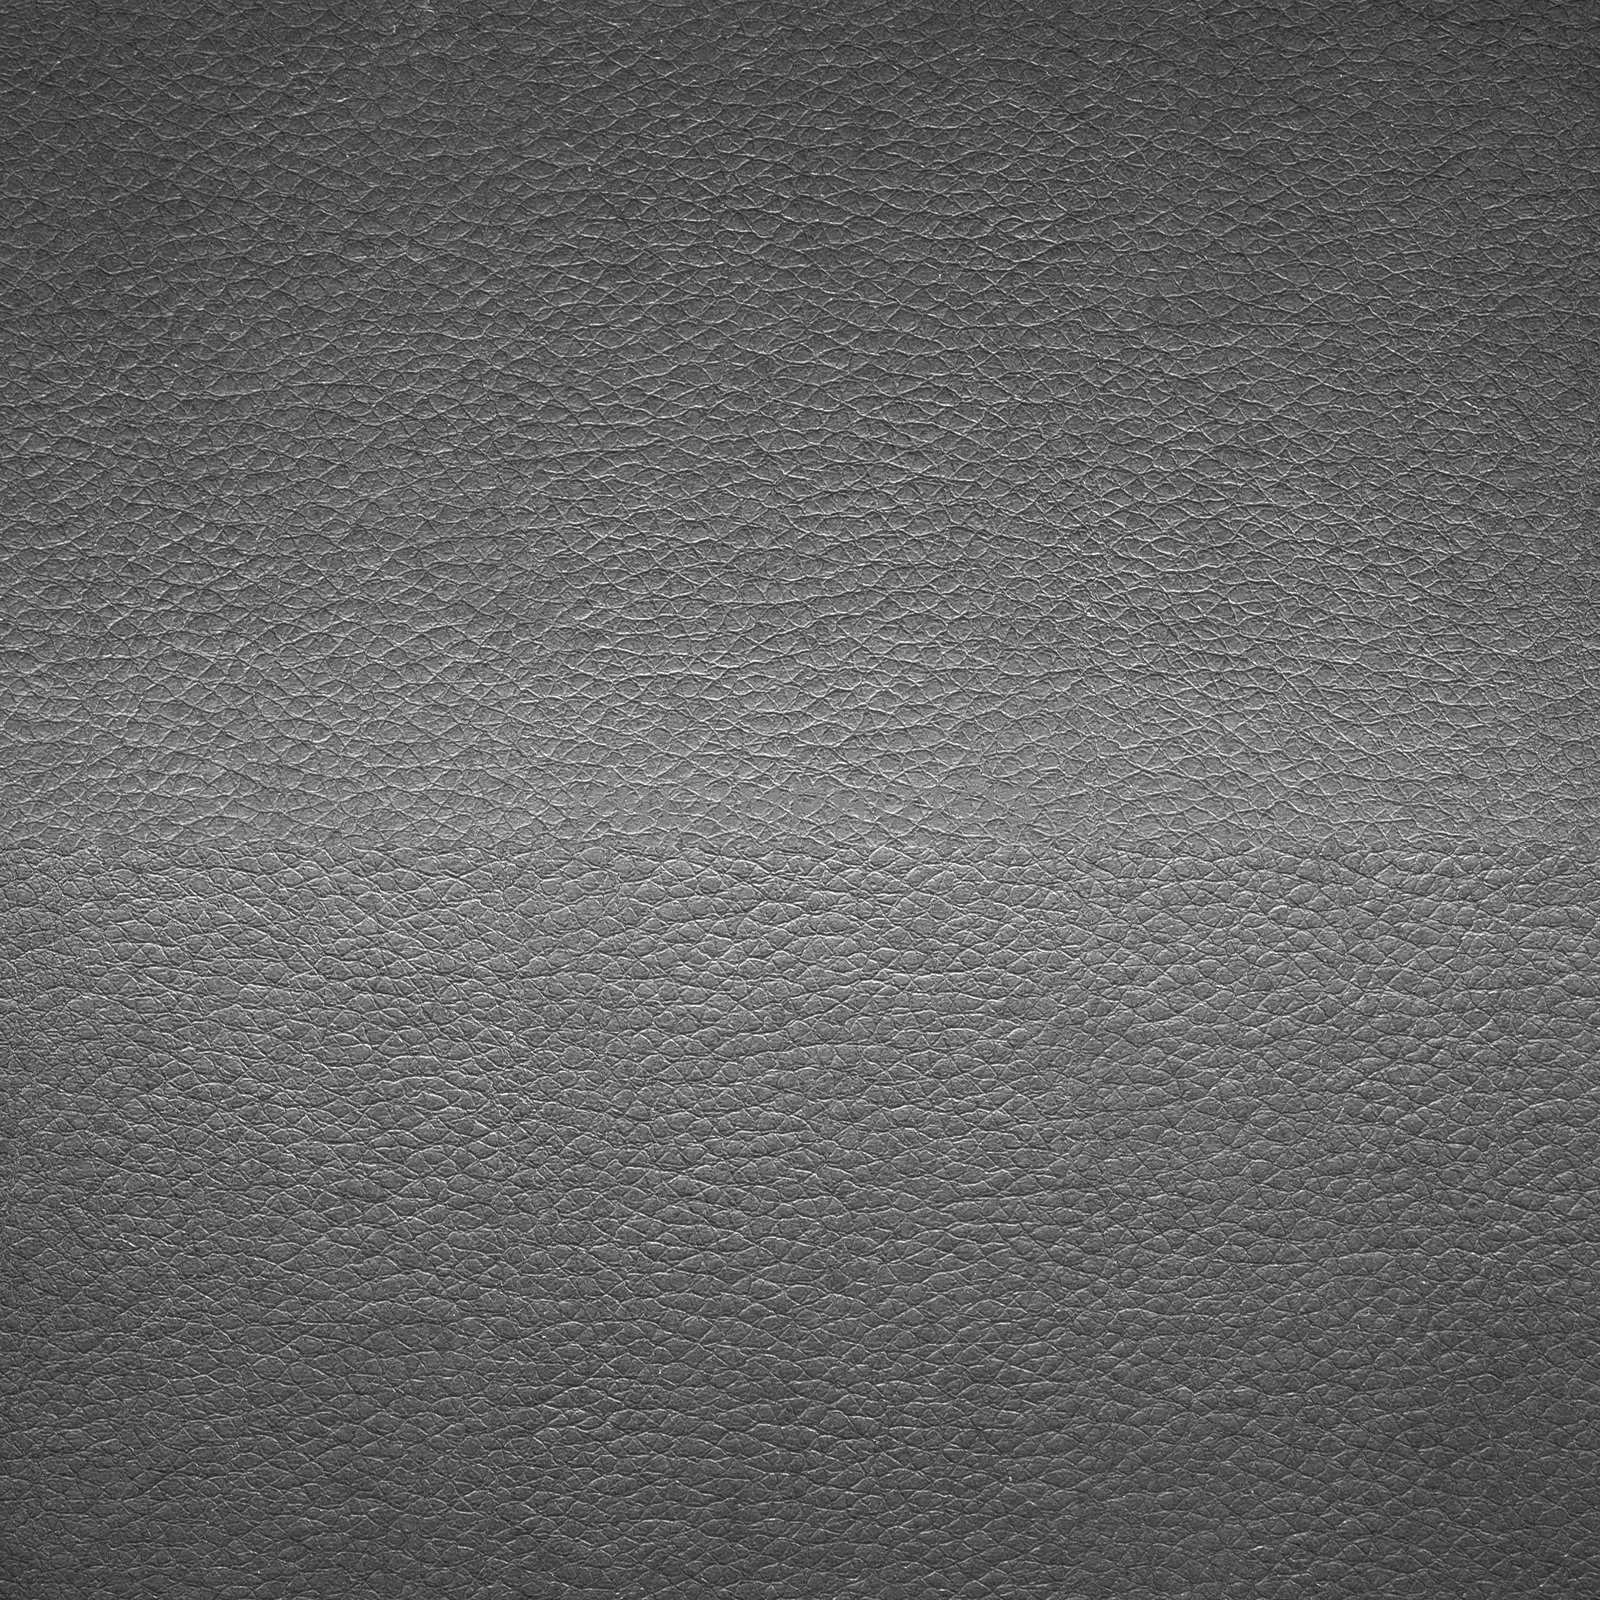 Black leather texture for background  by simpson33